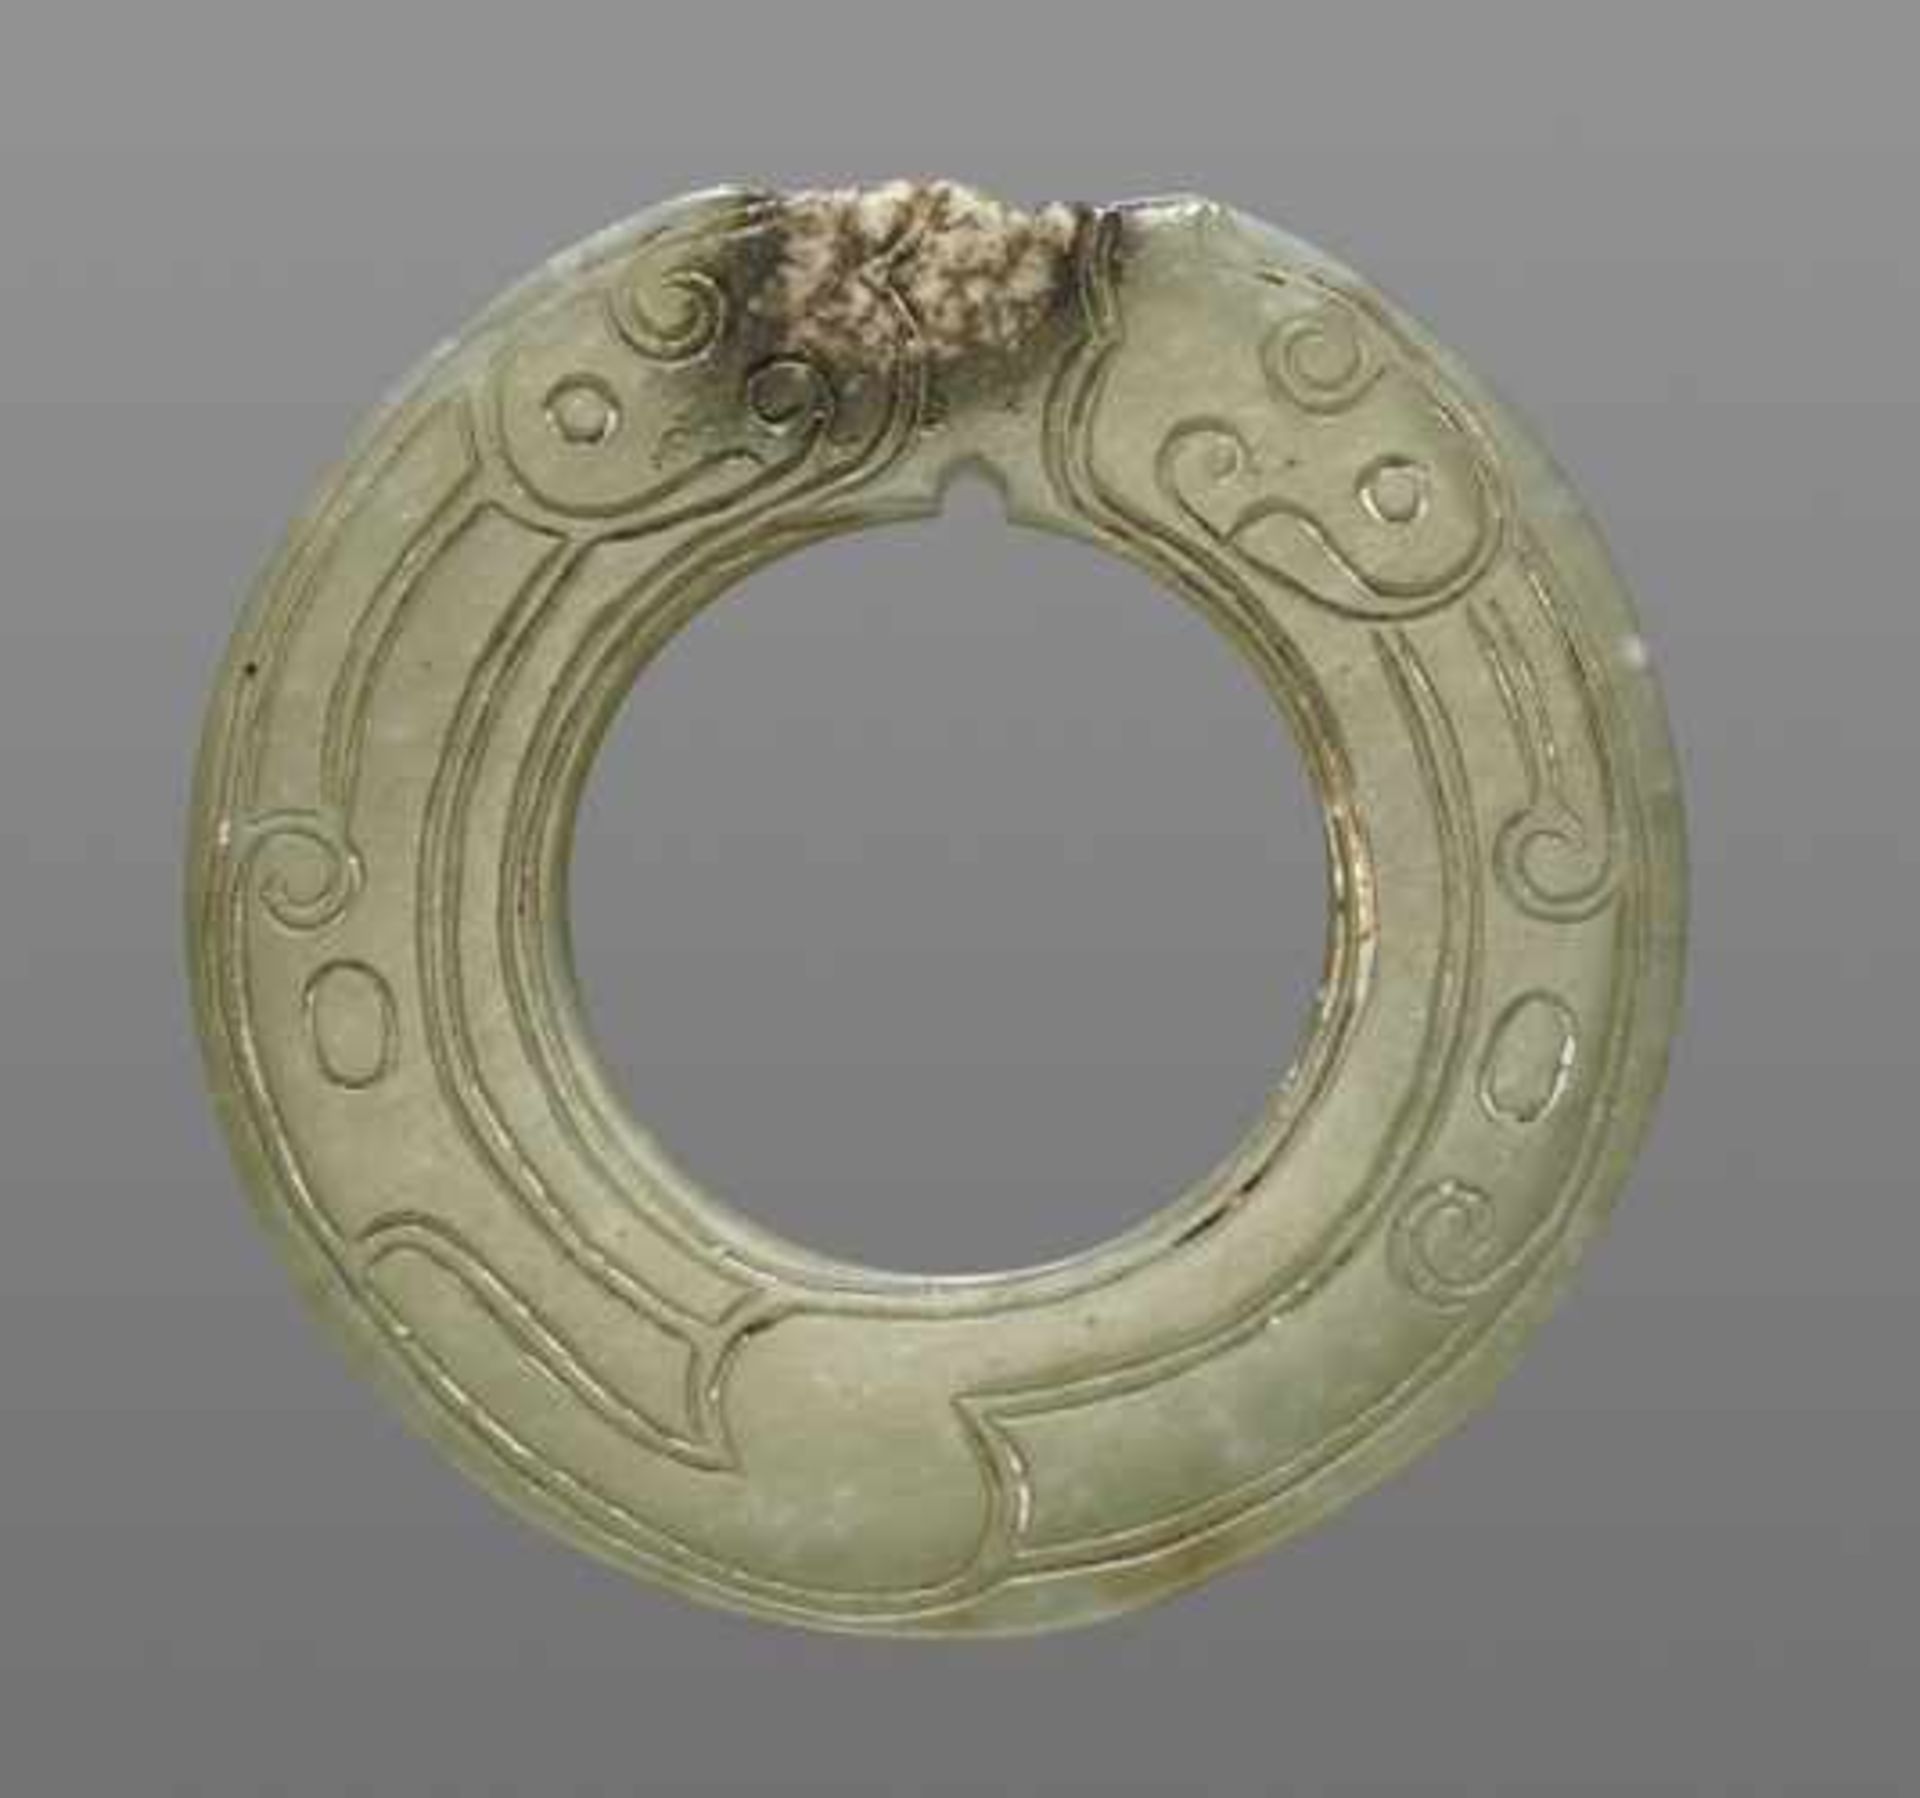 THIN AND DELICATE GREEN JADE RING WITH AN INCISED PATTERN OF STYLIZED DRAGONS Jade, China. Late - Image 2 of 6